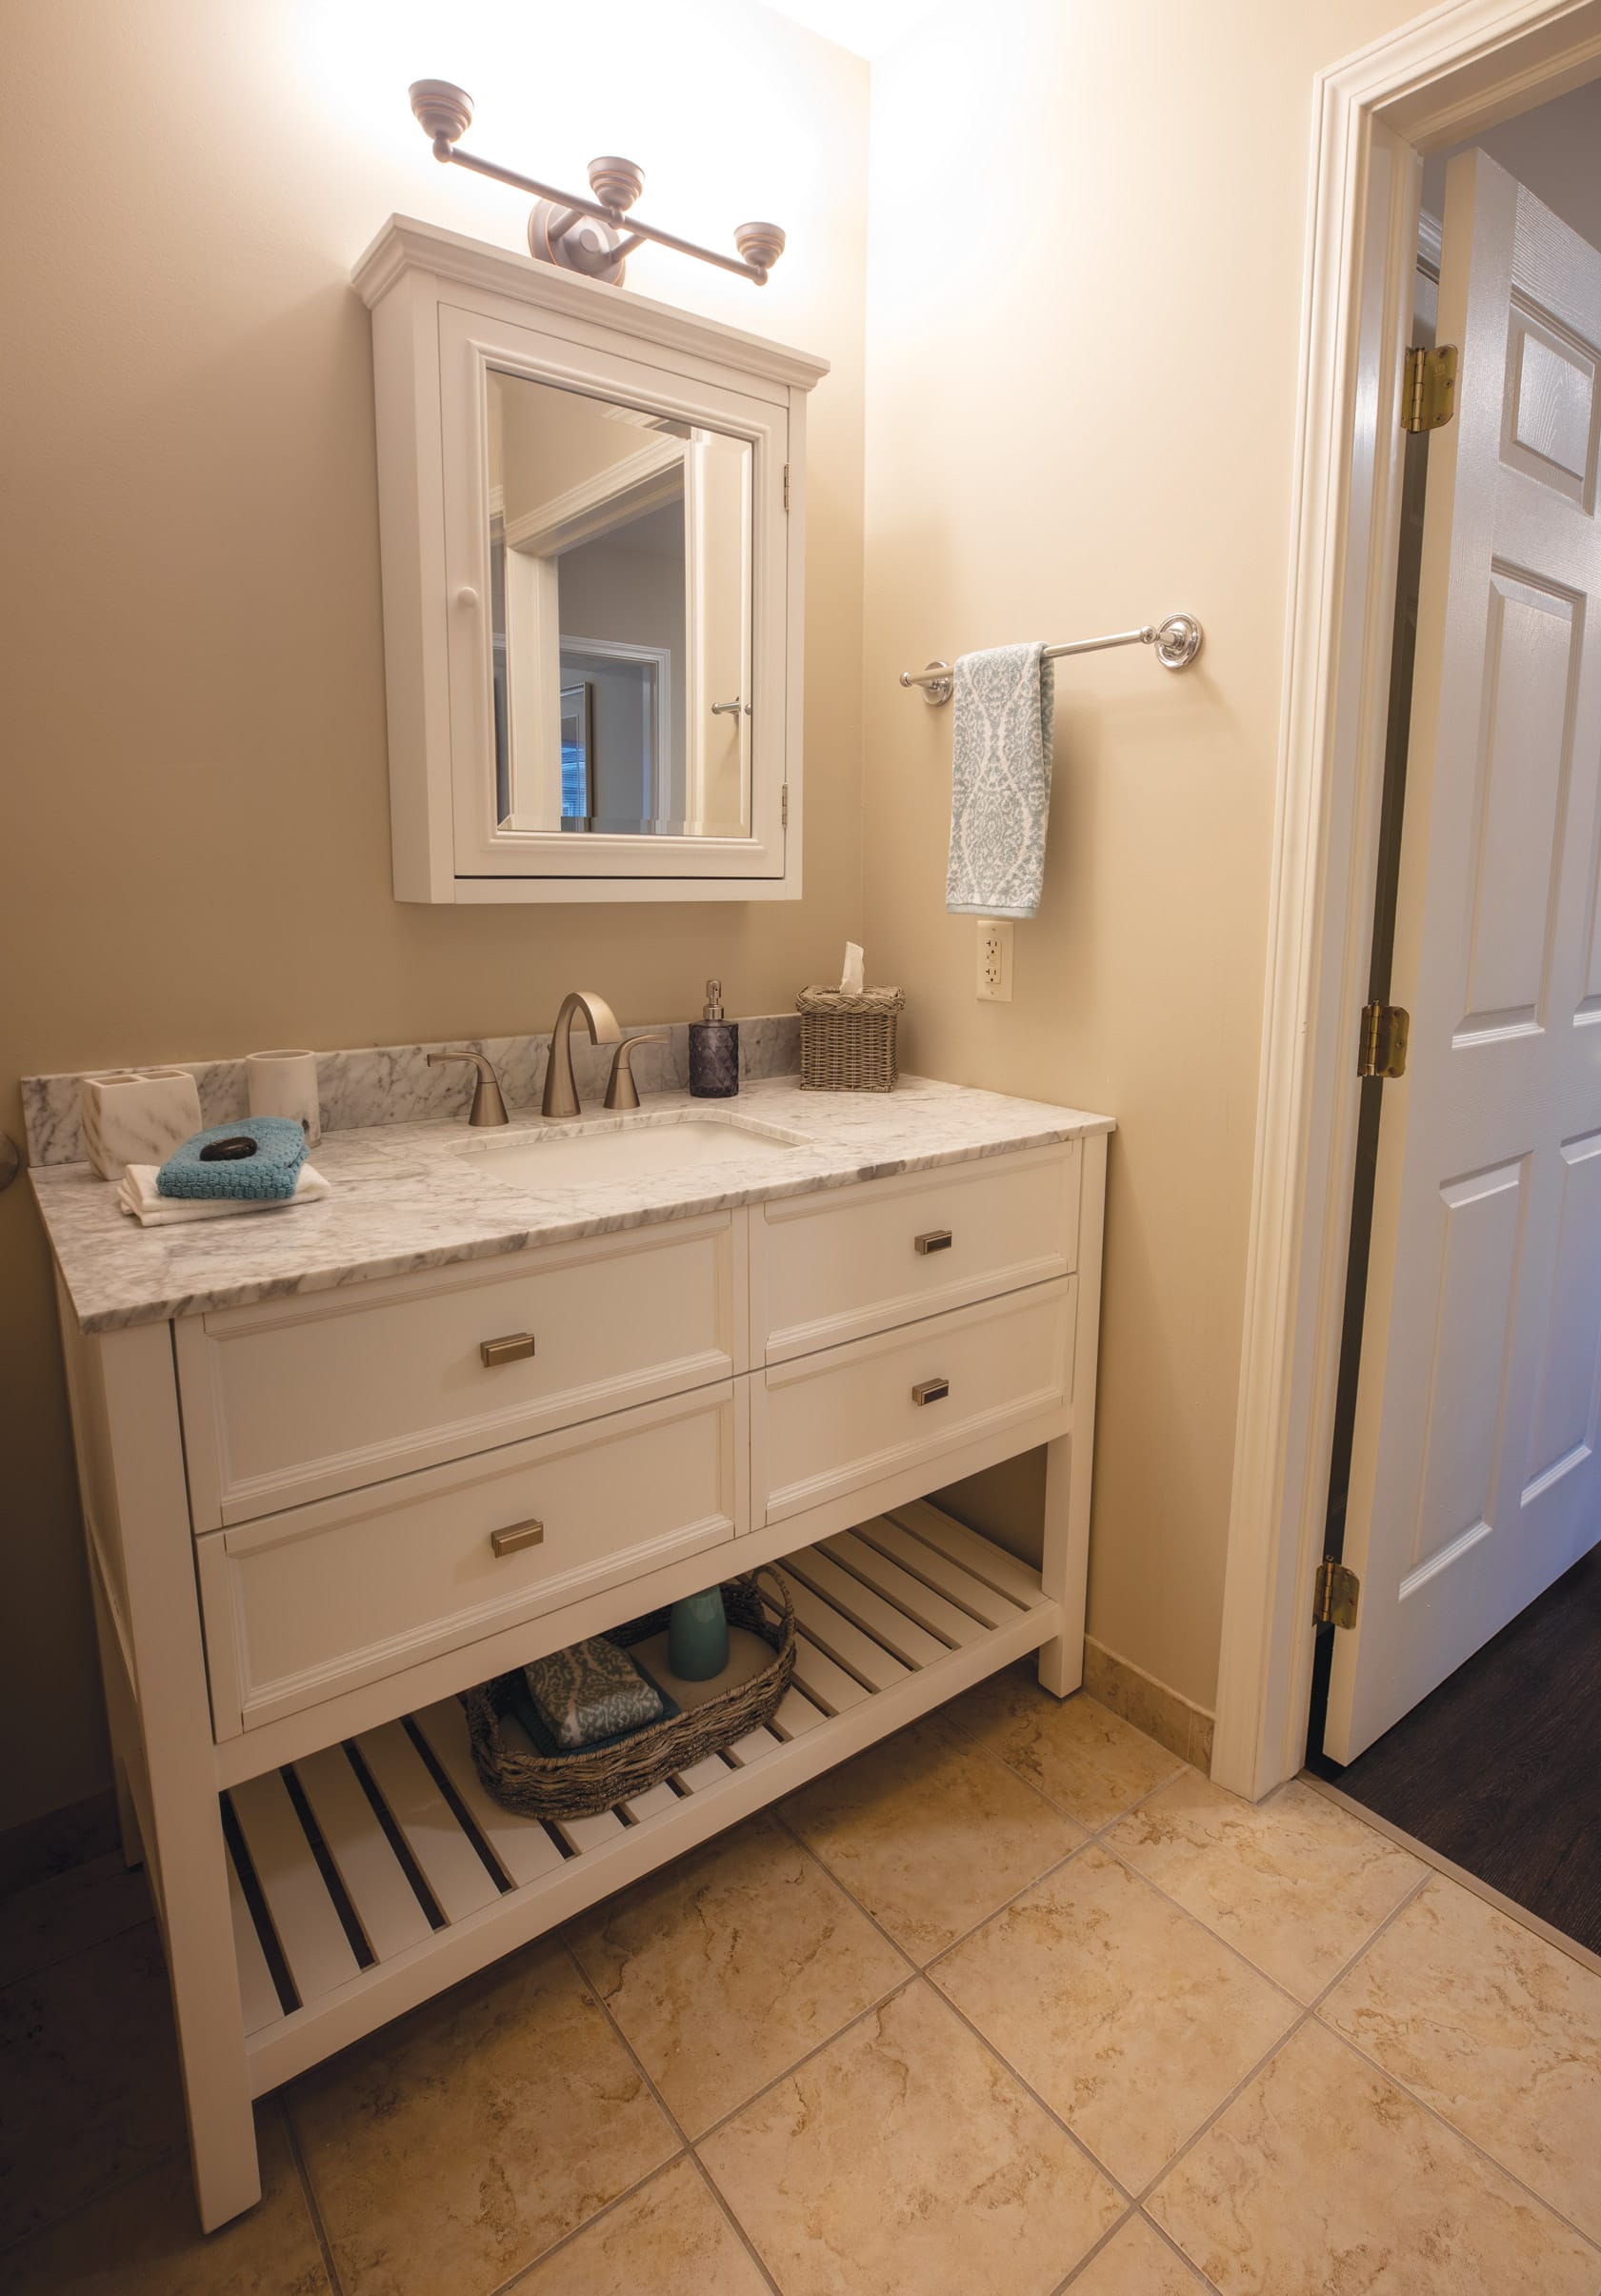 A bathroom in an apartment at The Legacy at Fairways.